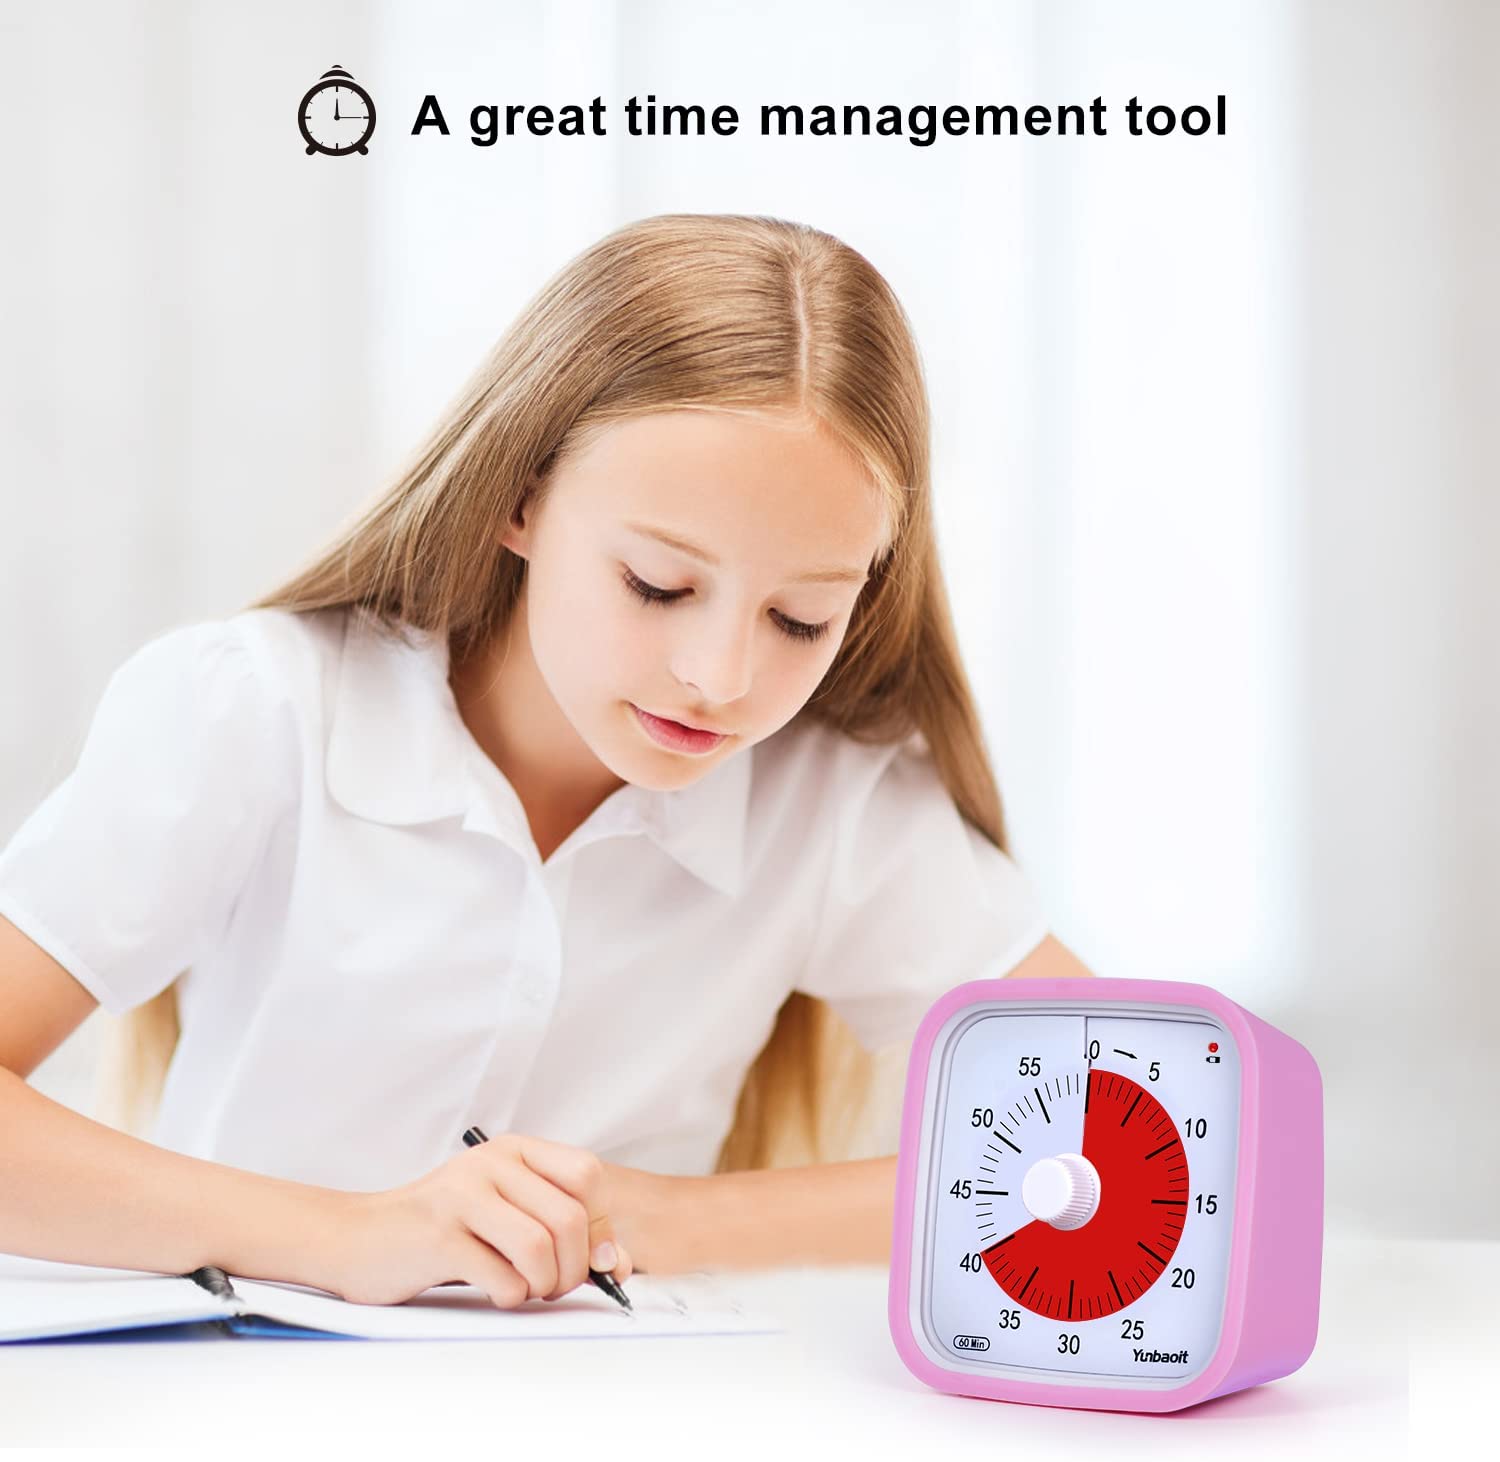 Visual-Timers-Management-tool